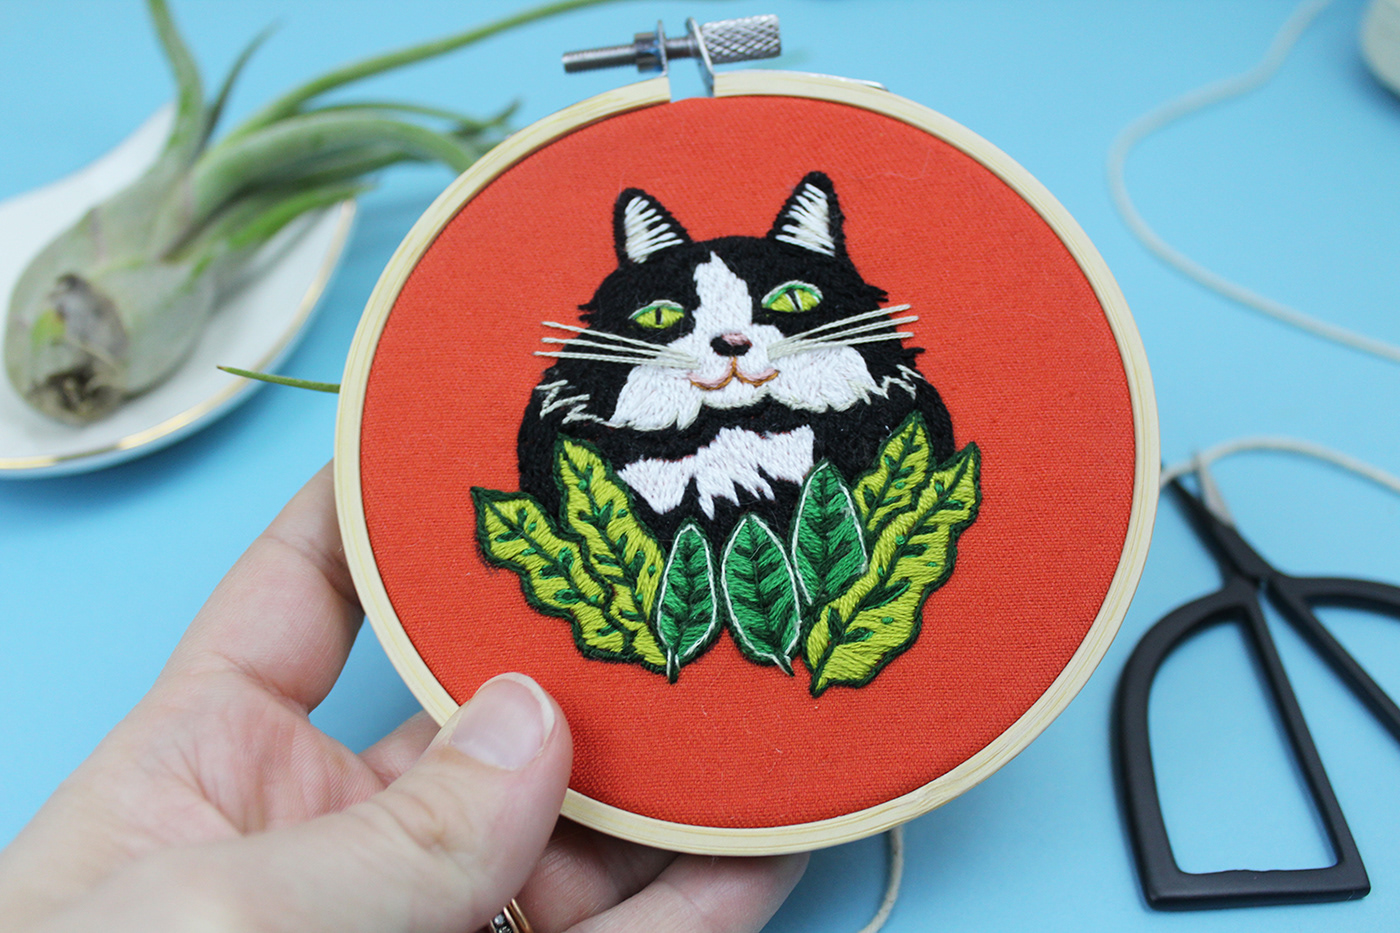 cats Embroidery thread sewing plants crafts   ILLUSTRATION 